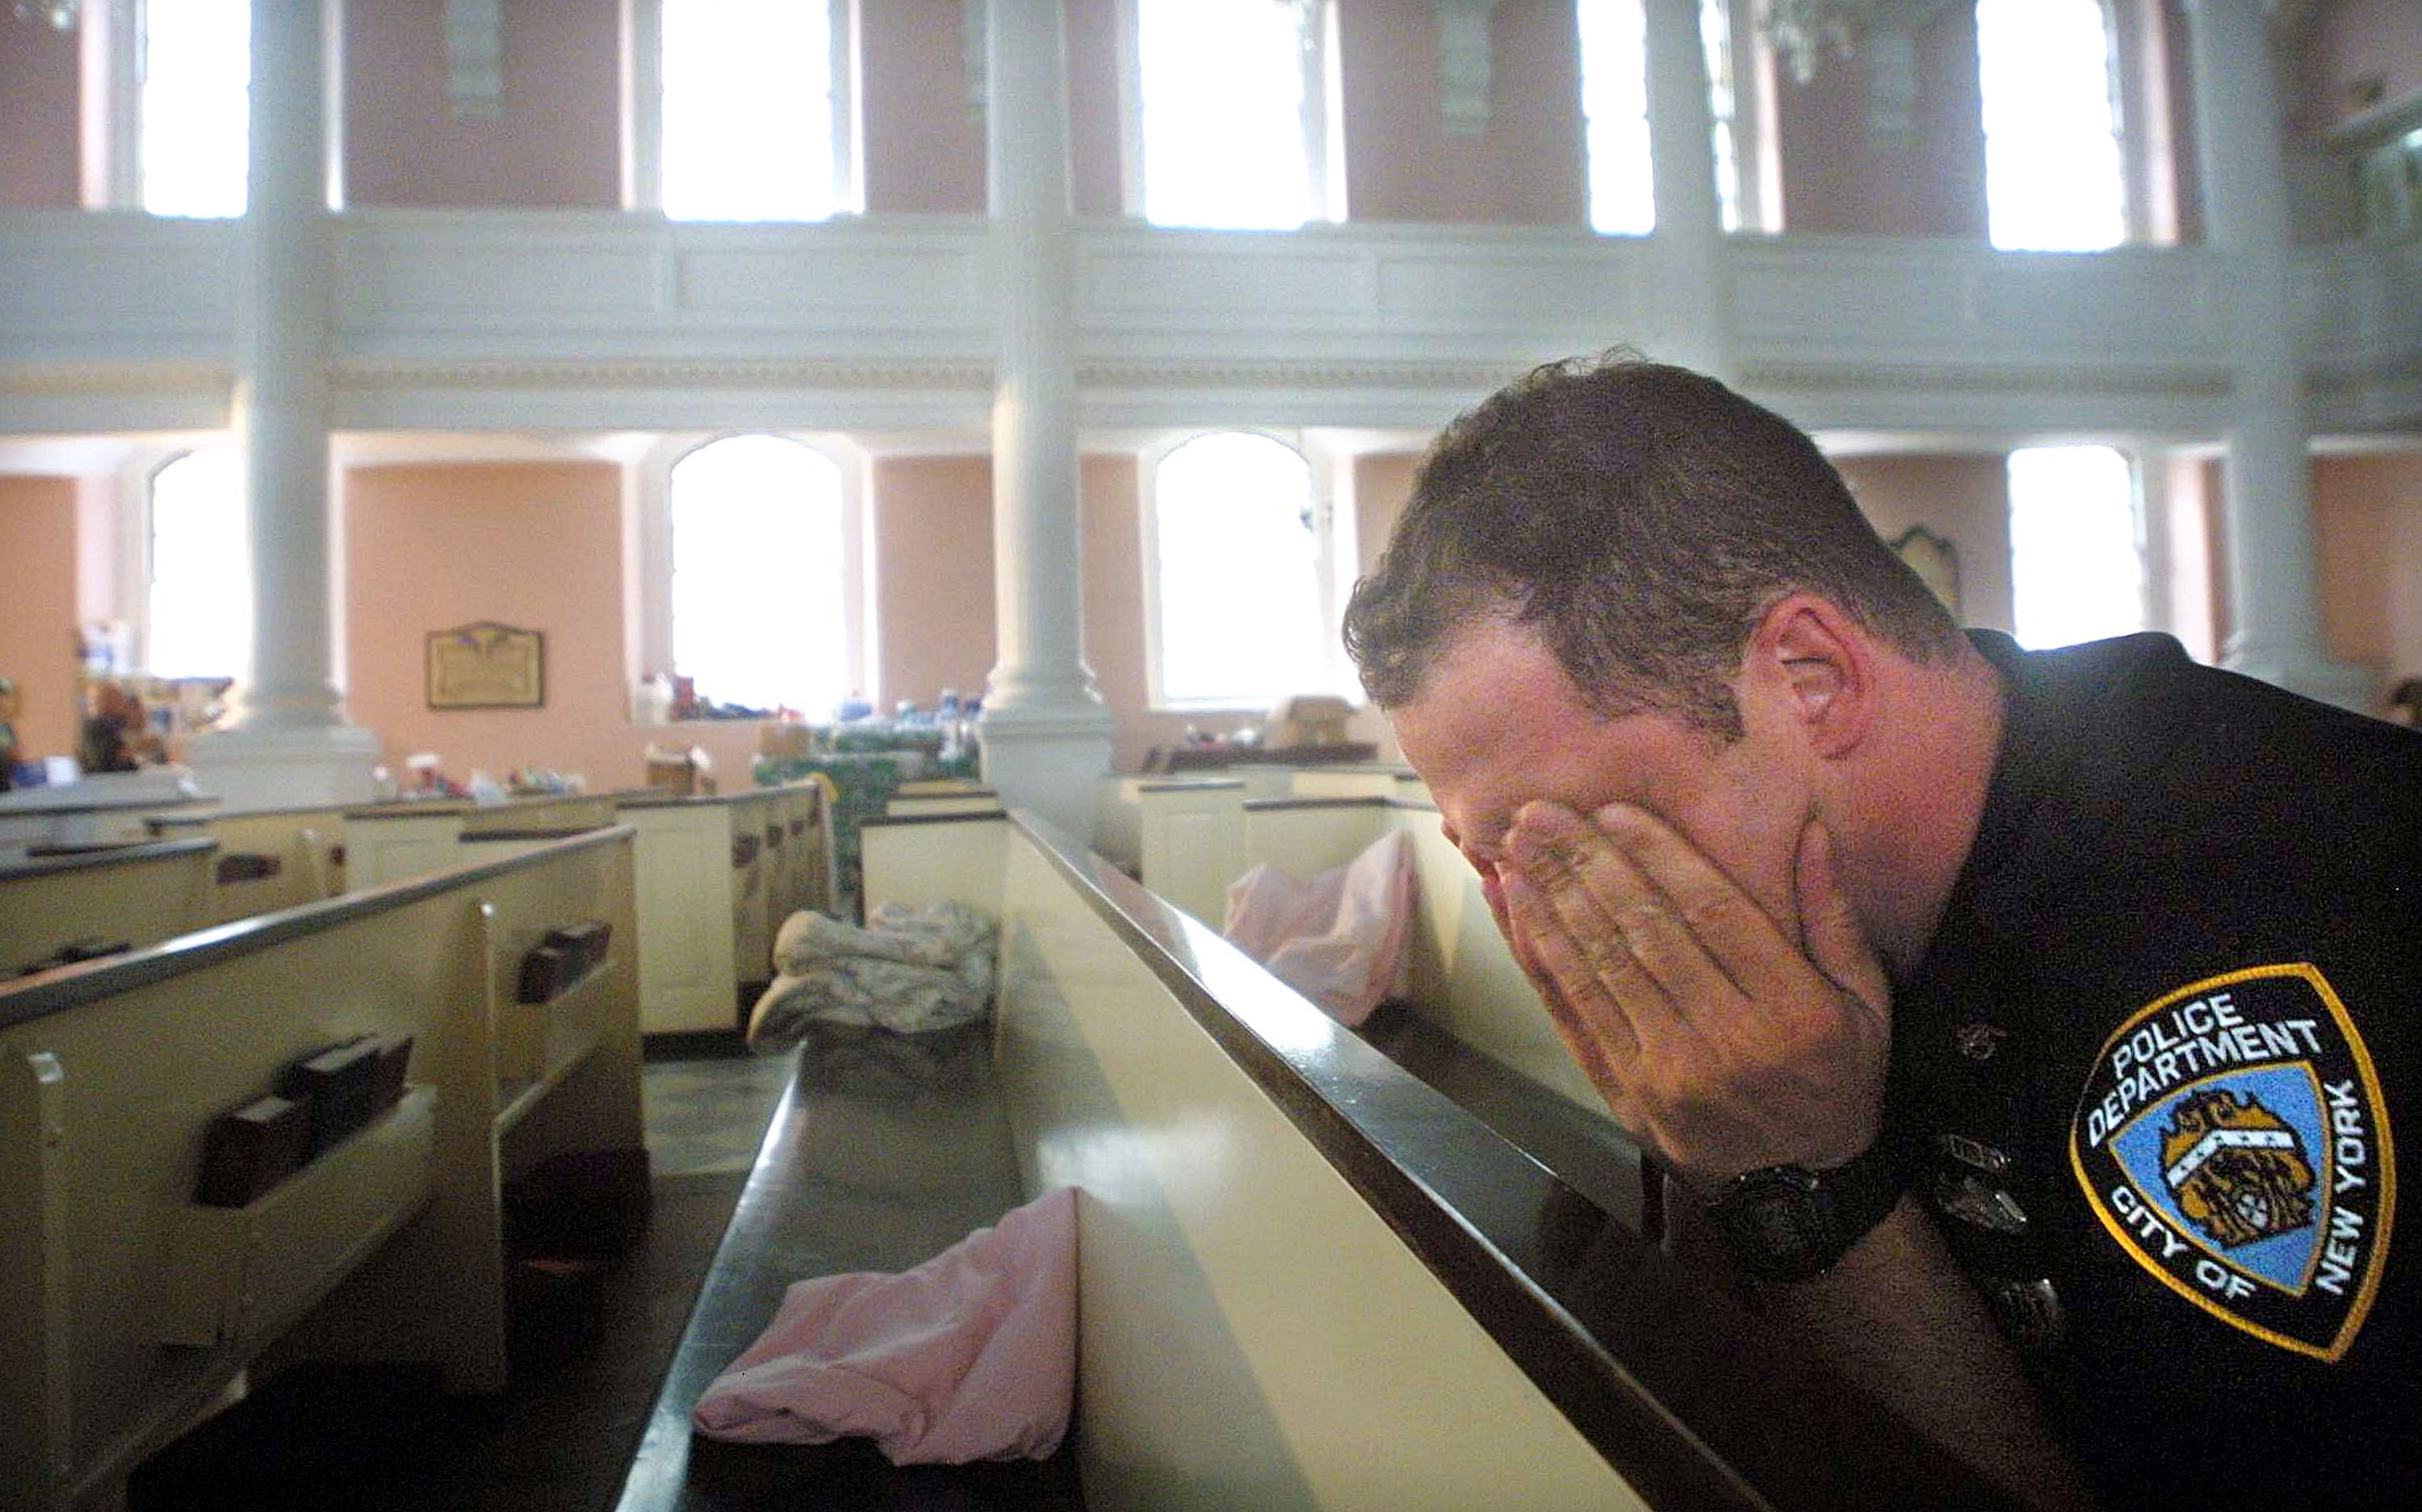 NYPD police officer Ken Radigan rubs his eyes after briefly sleeping in a pew at St Paul’s Episcopal Chapel, near the site of the World Trade Center attack. The chapel served as a relief area for rescue workers